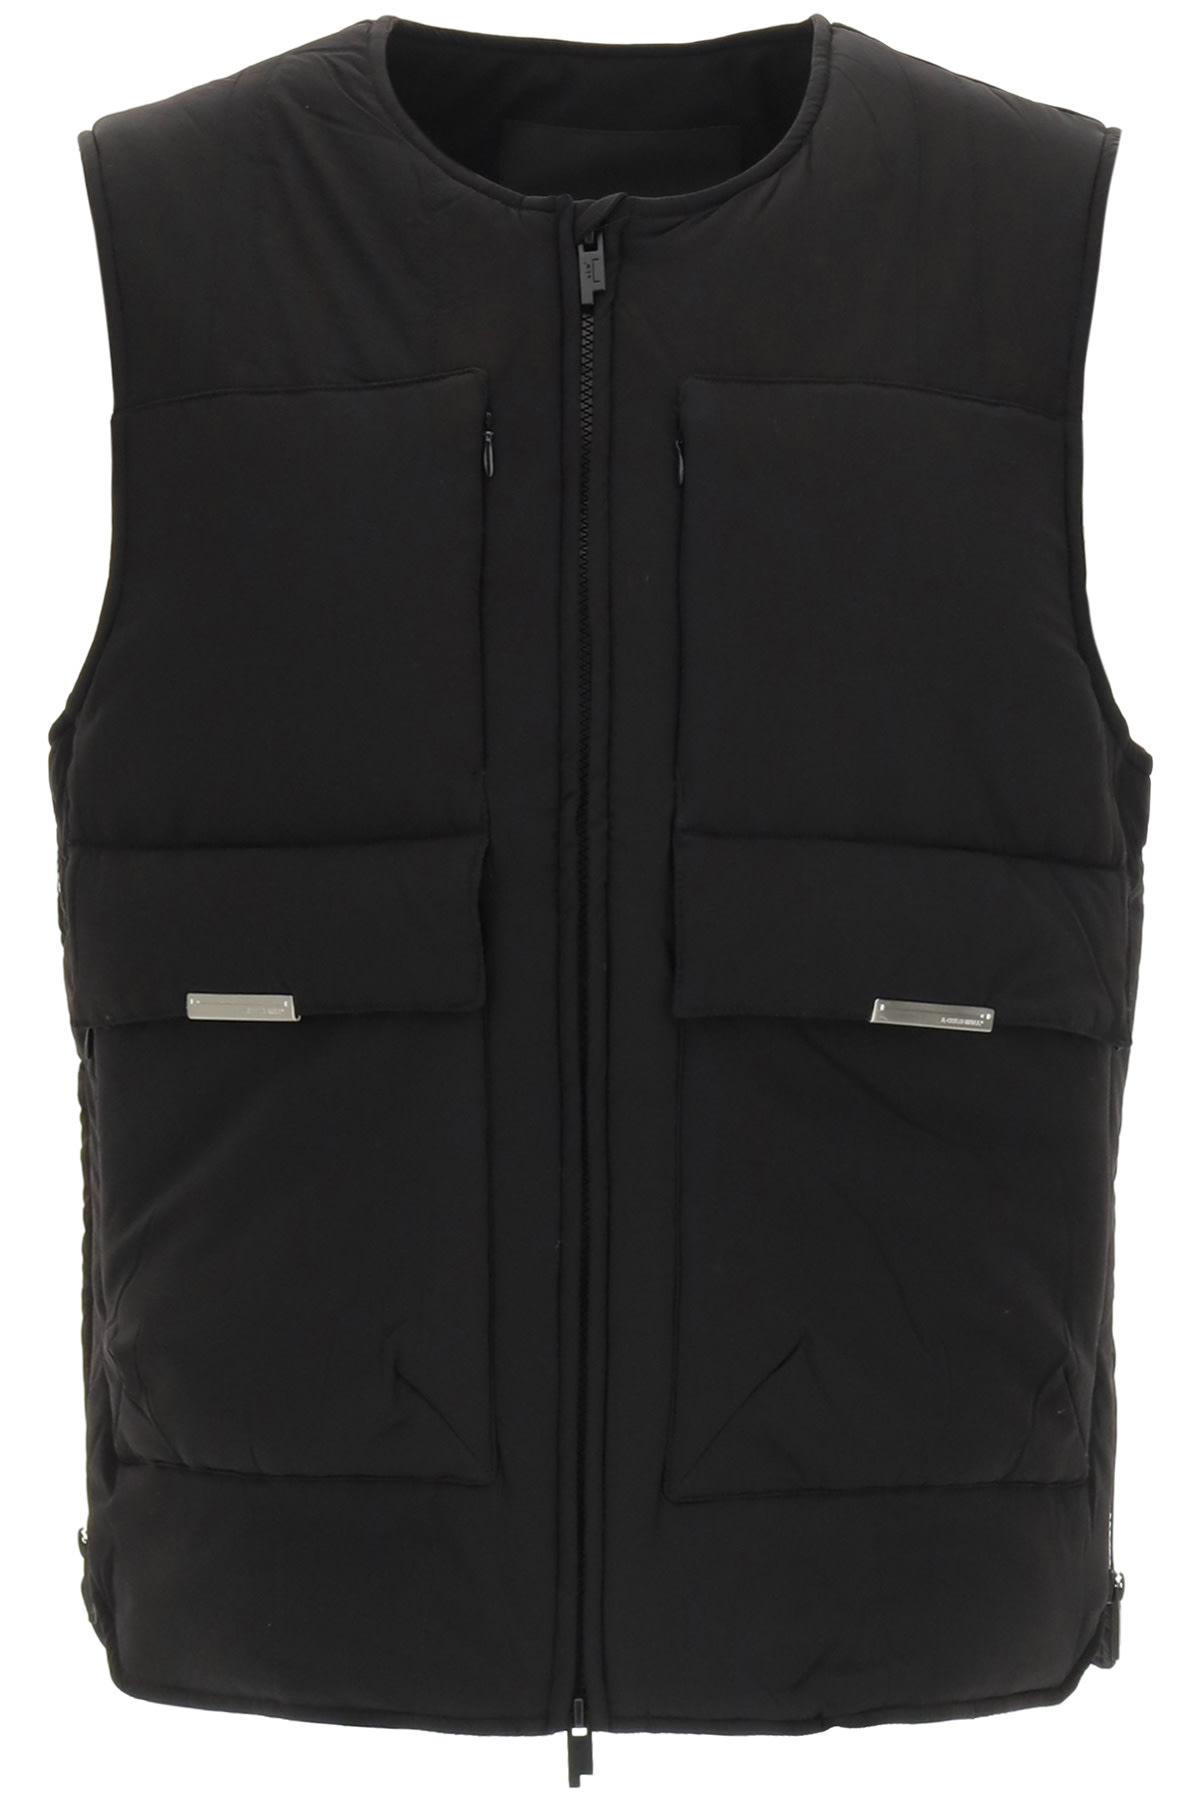 A-COLD-WALL Panel Vest With Zip